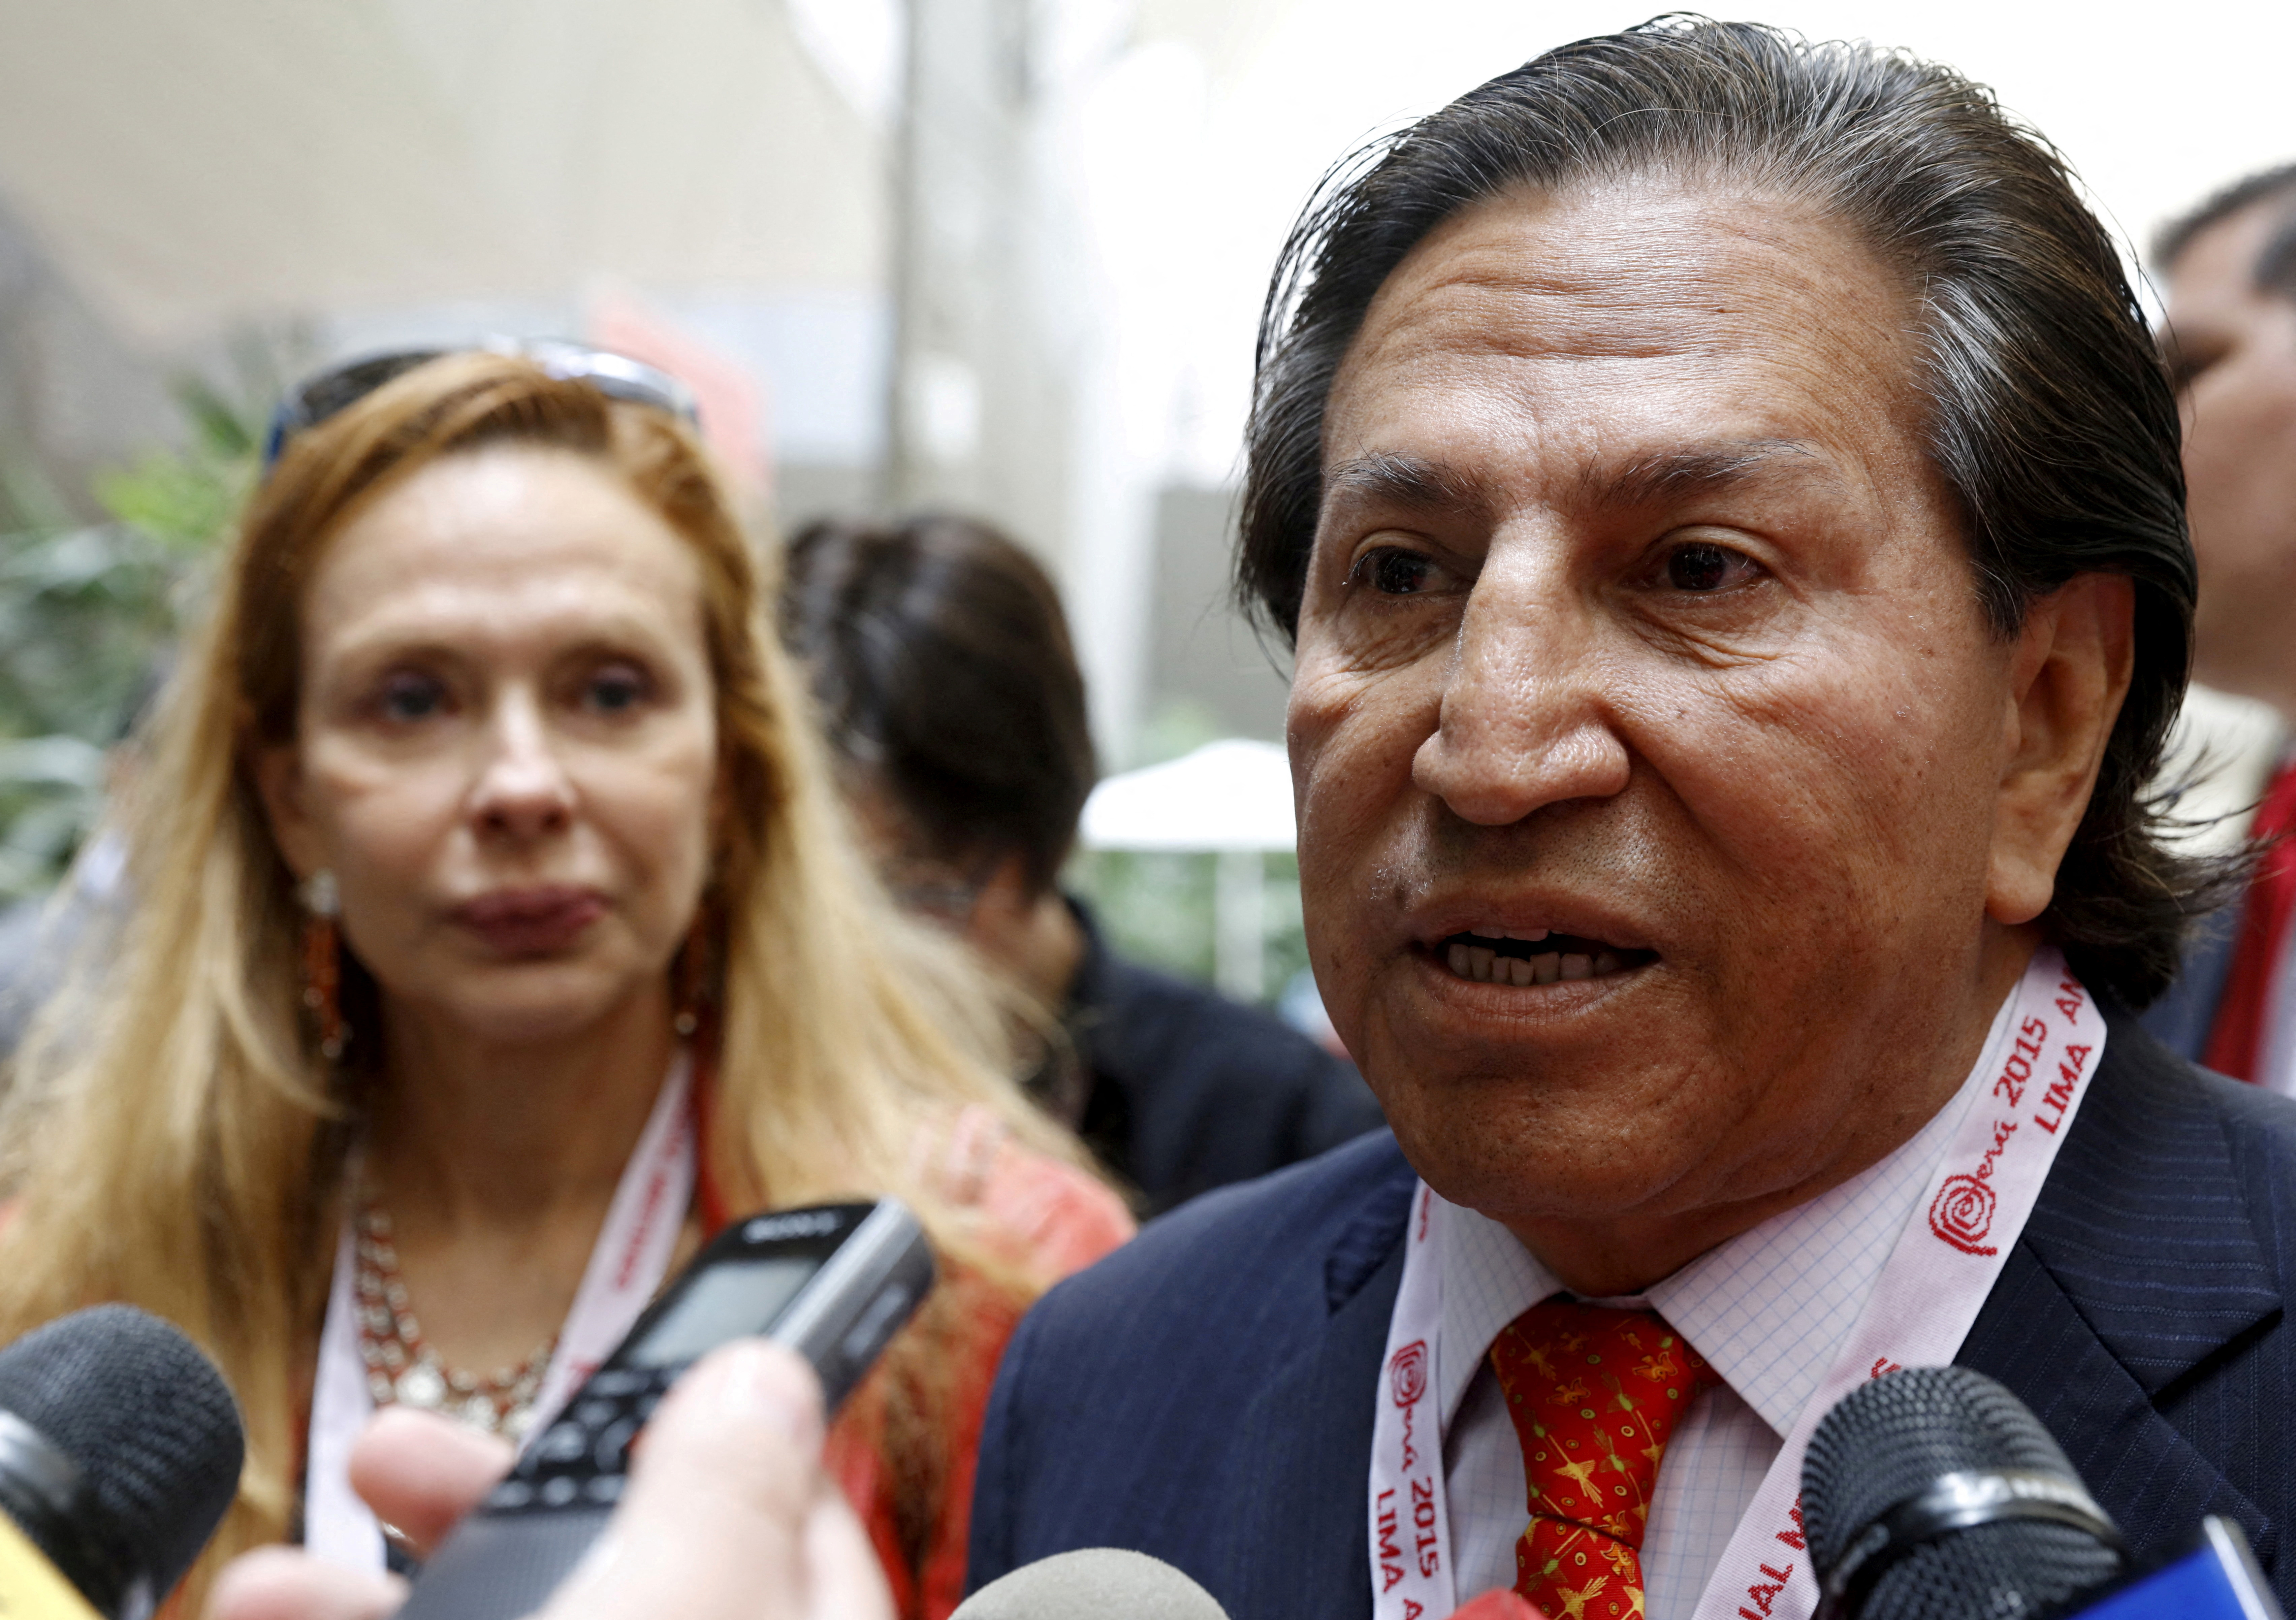 Former Peruvian President Alejandro Toledo and his wife Eliane Karp arrives to the 2015 IMF/World Bank Annual Meetings in Lima